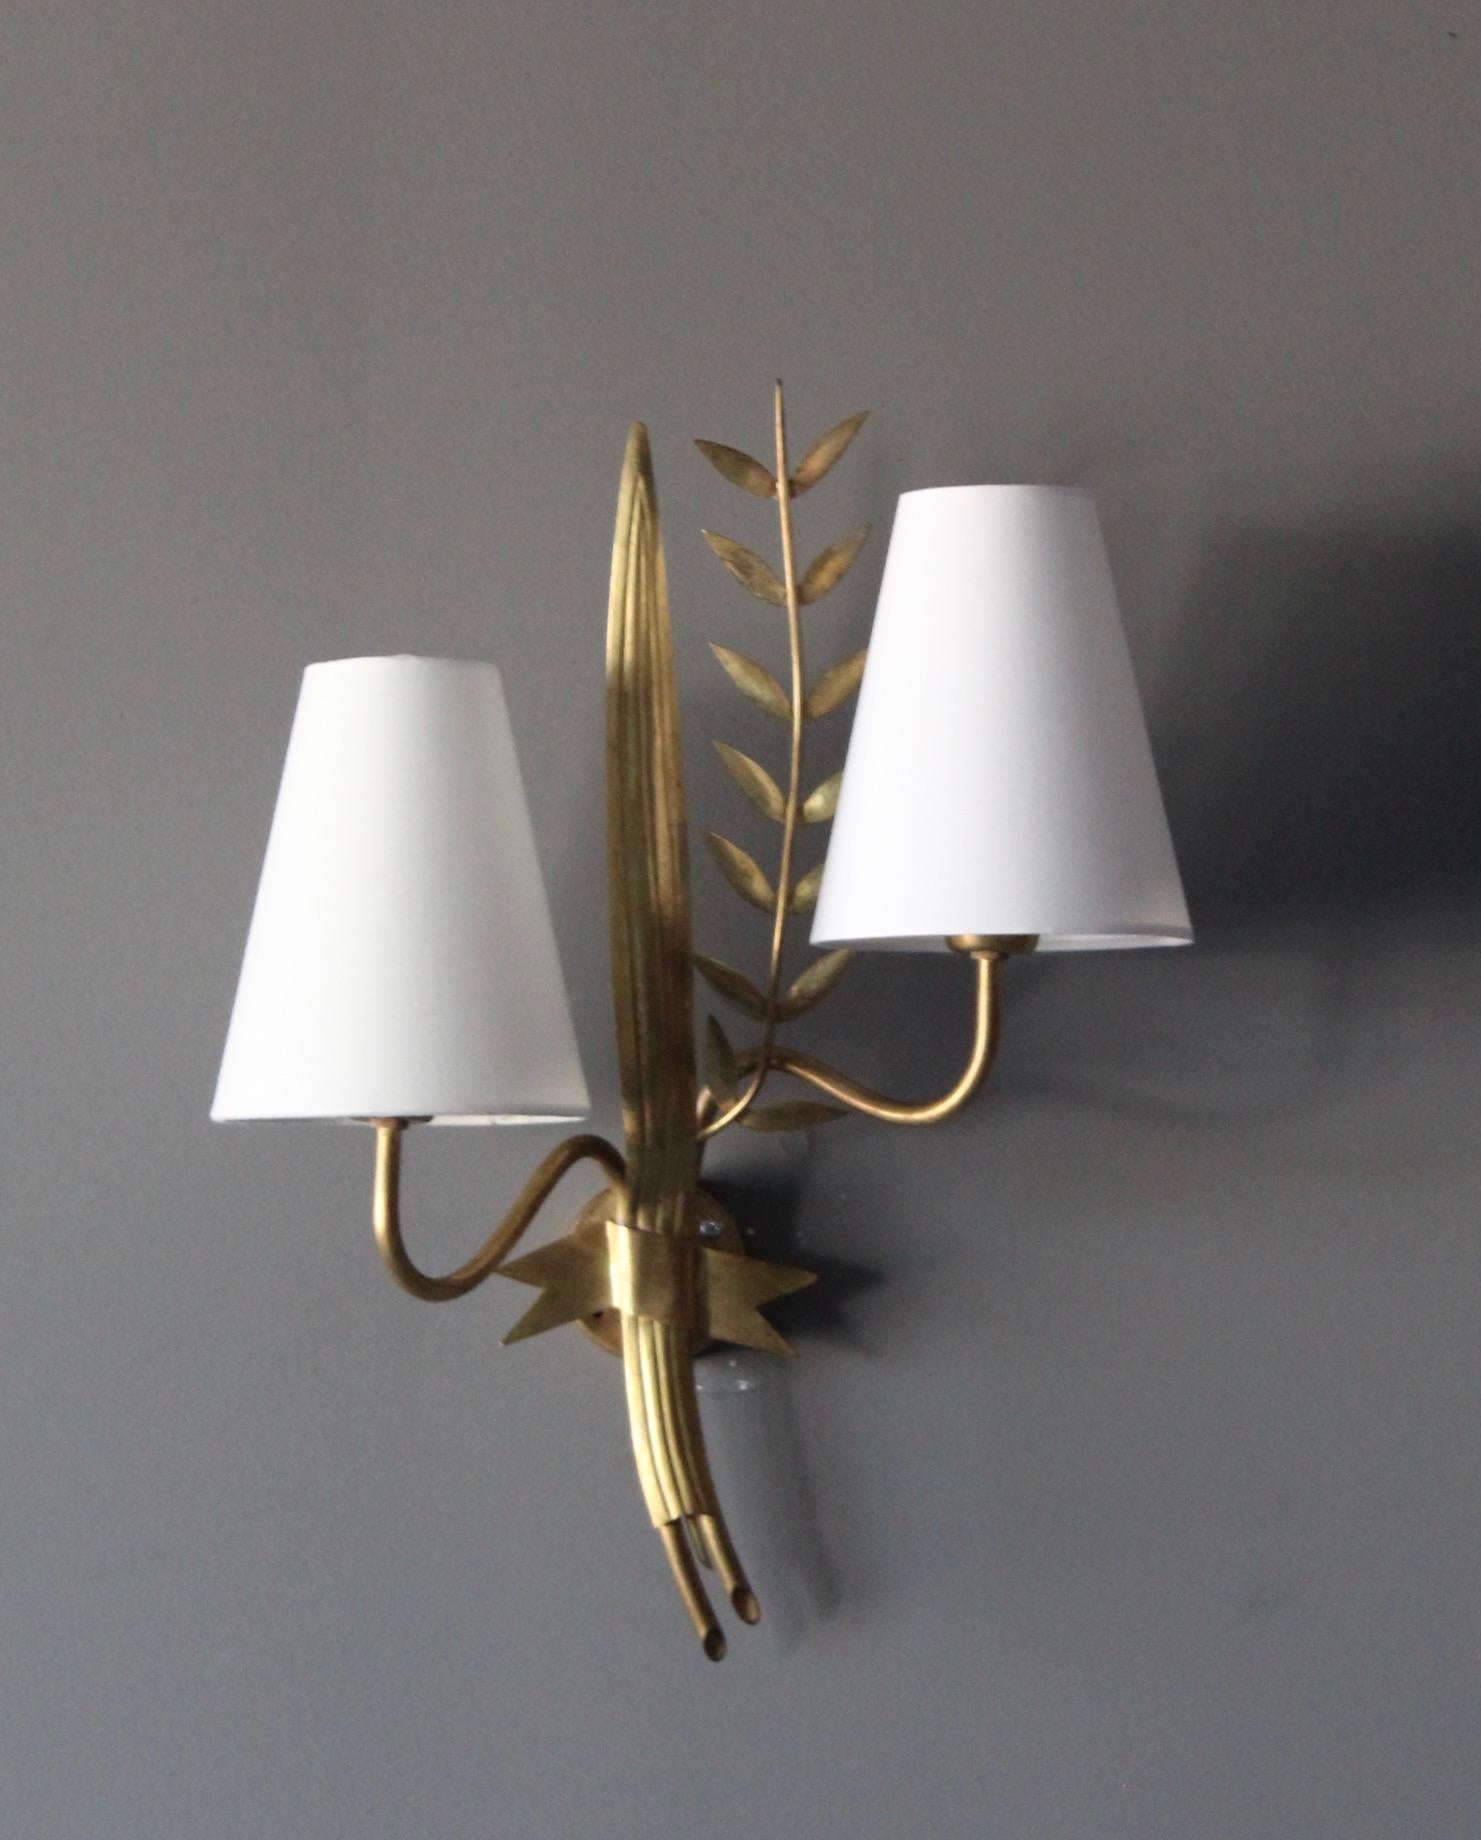 A wall light / sconce. Designed by Swedish Hans Bergström. Produced by his own firm Ateljé Lyktan, Sweden, 1940s.

Stated dimensions include lampshades.

Other designers of the period include Paavo Tynell, Hans Agne Jacobsson, Alvar Aalto, Josef